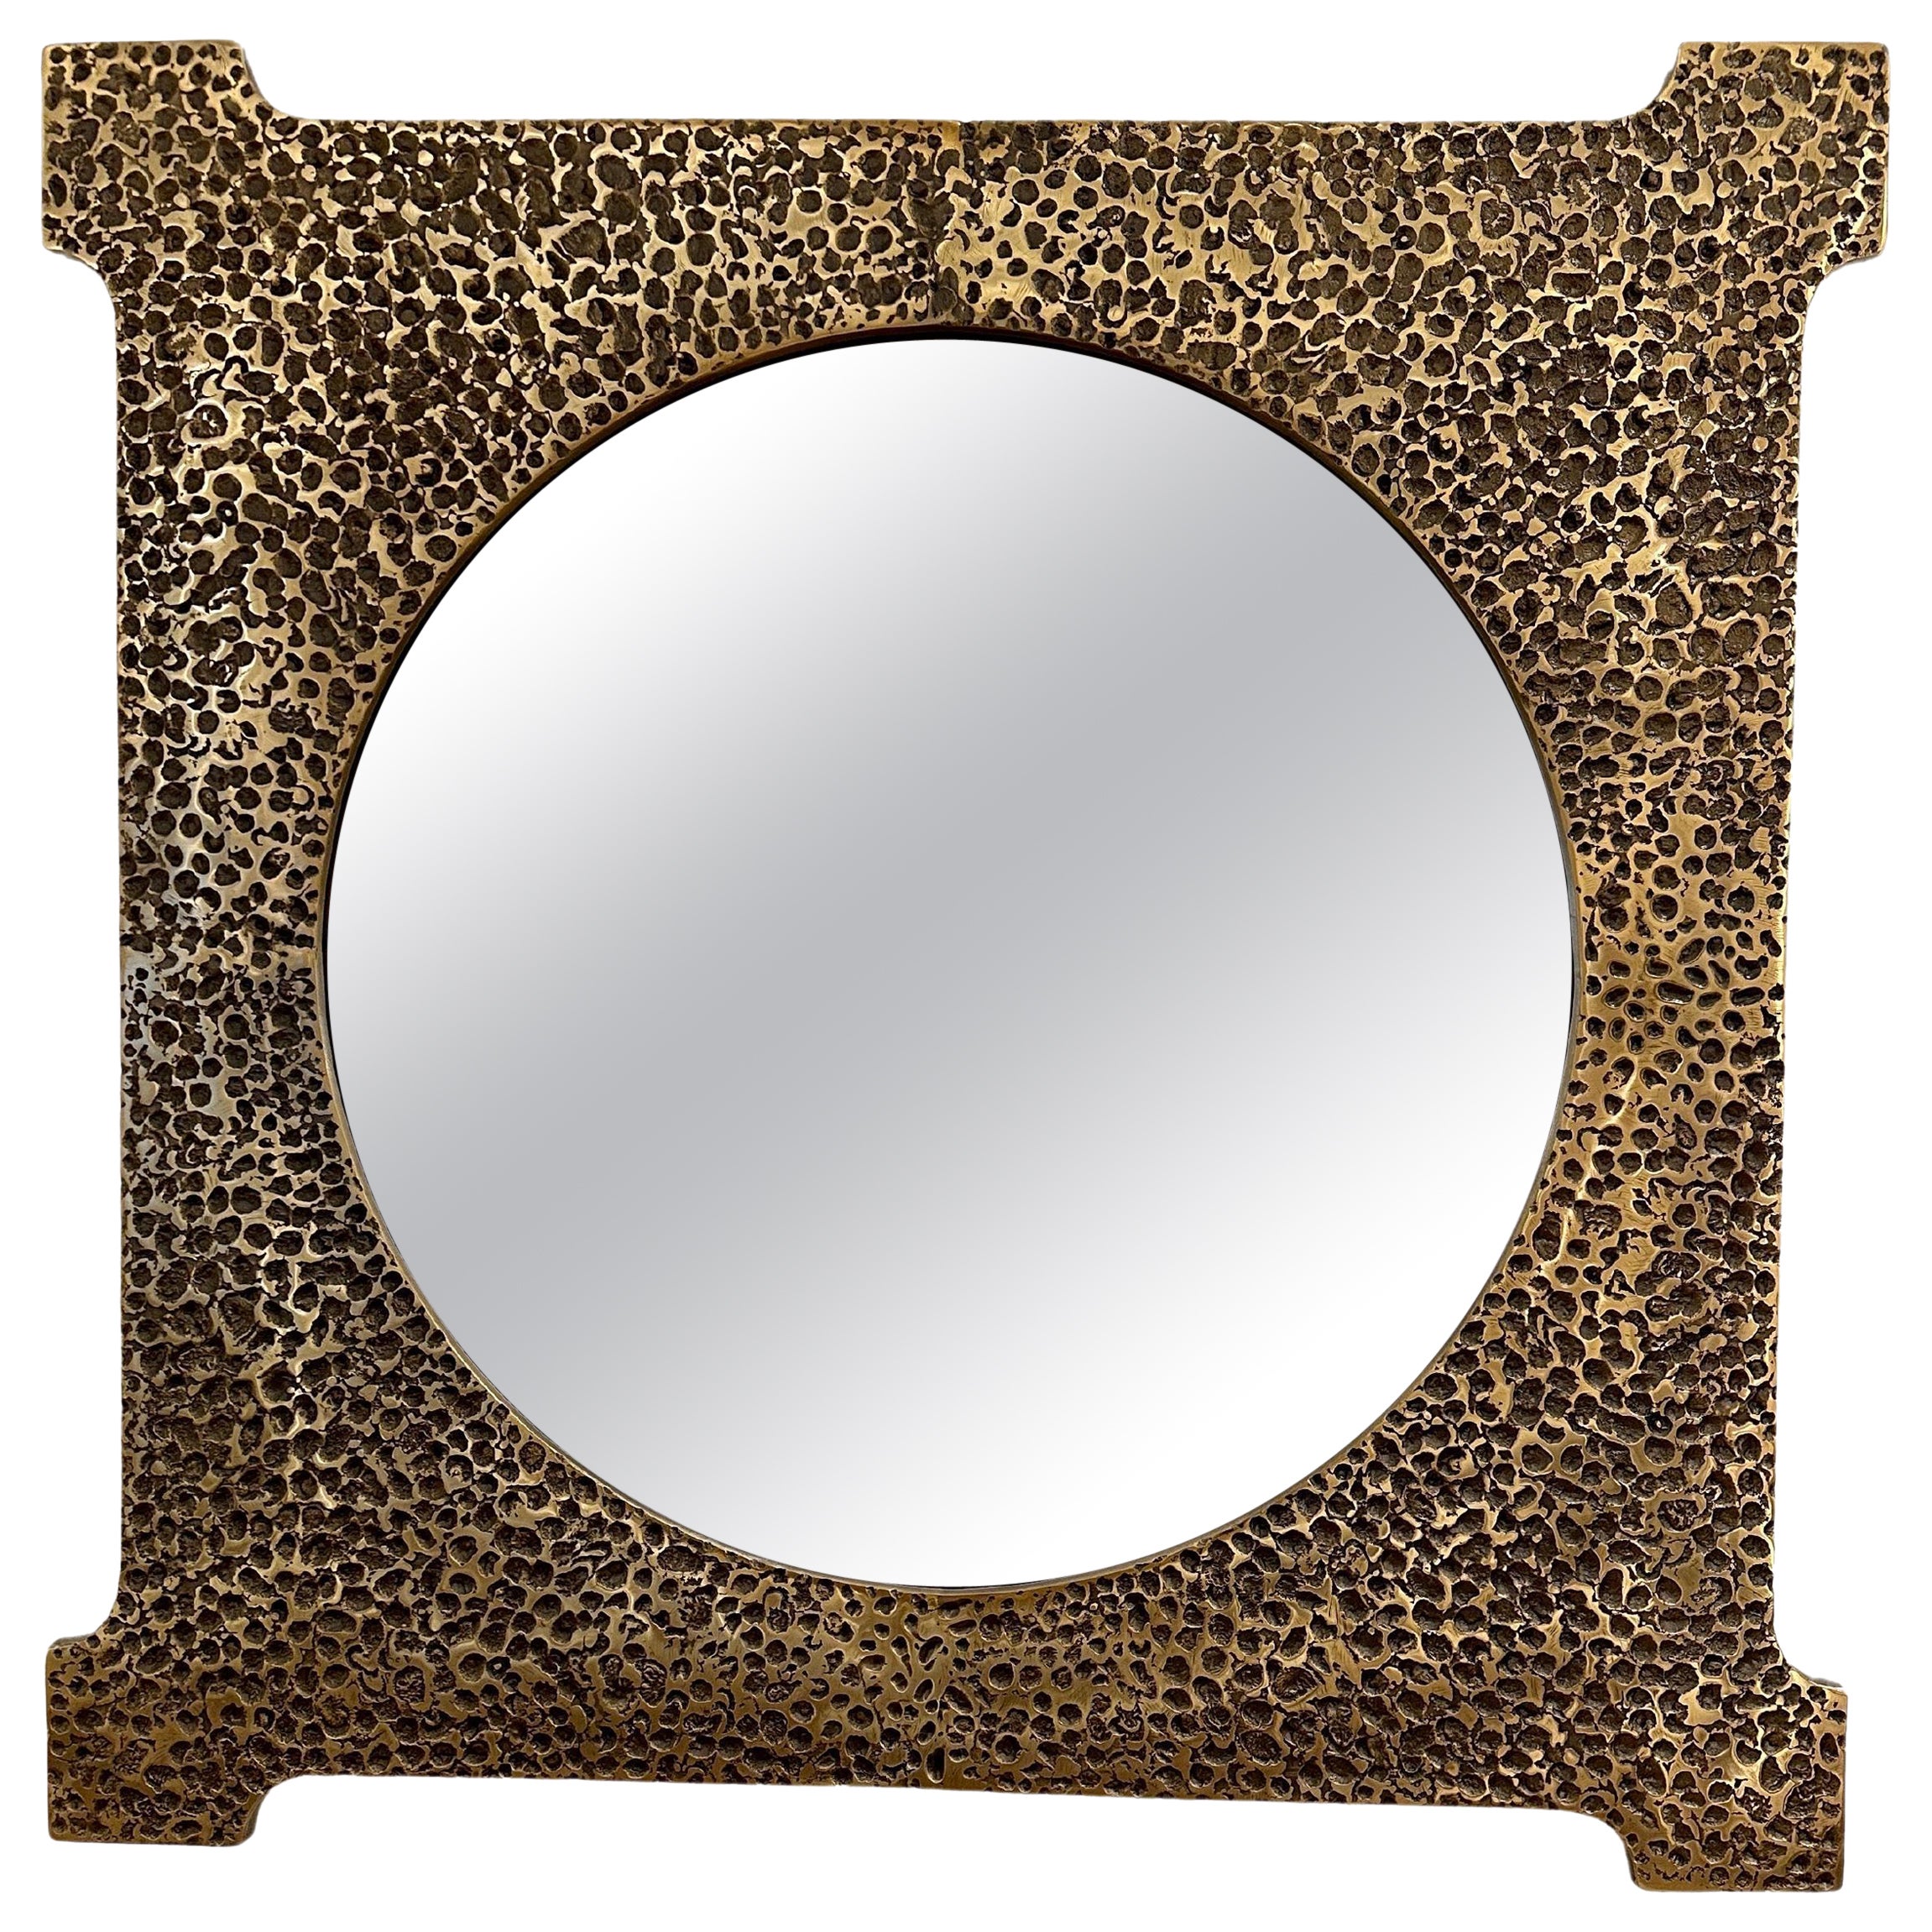 Exquisite Brutal Hammered Bronze Wall Mirror For Sale